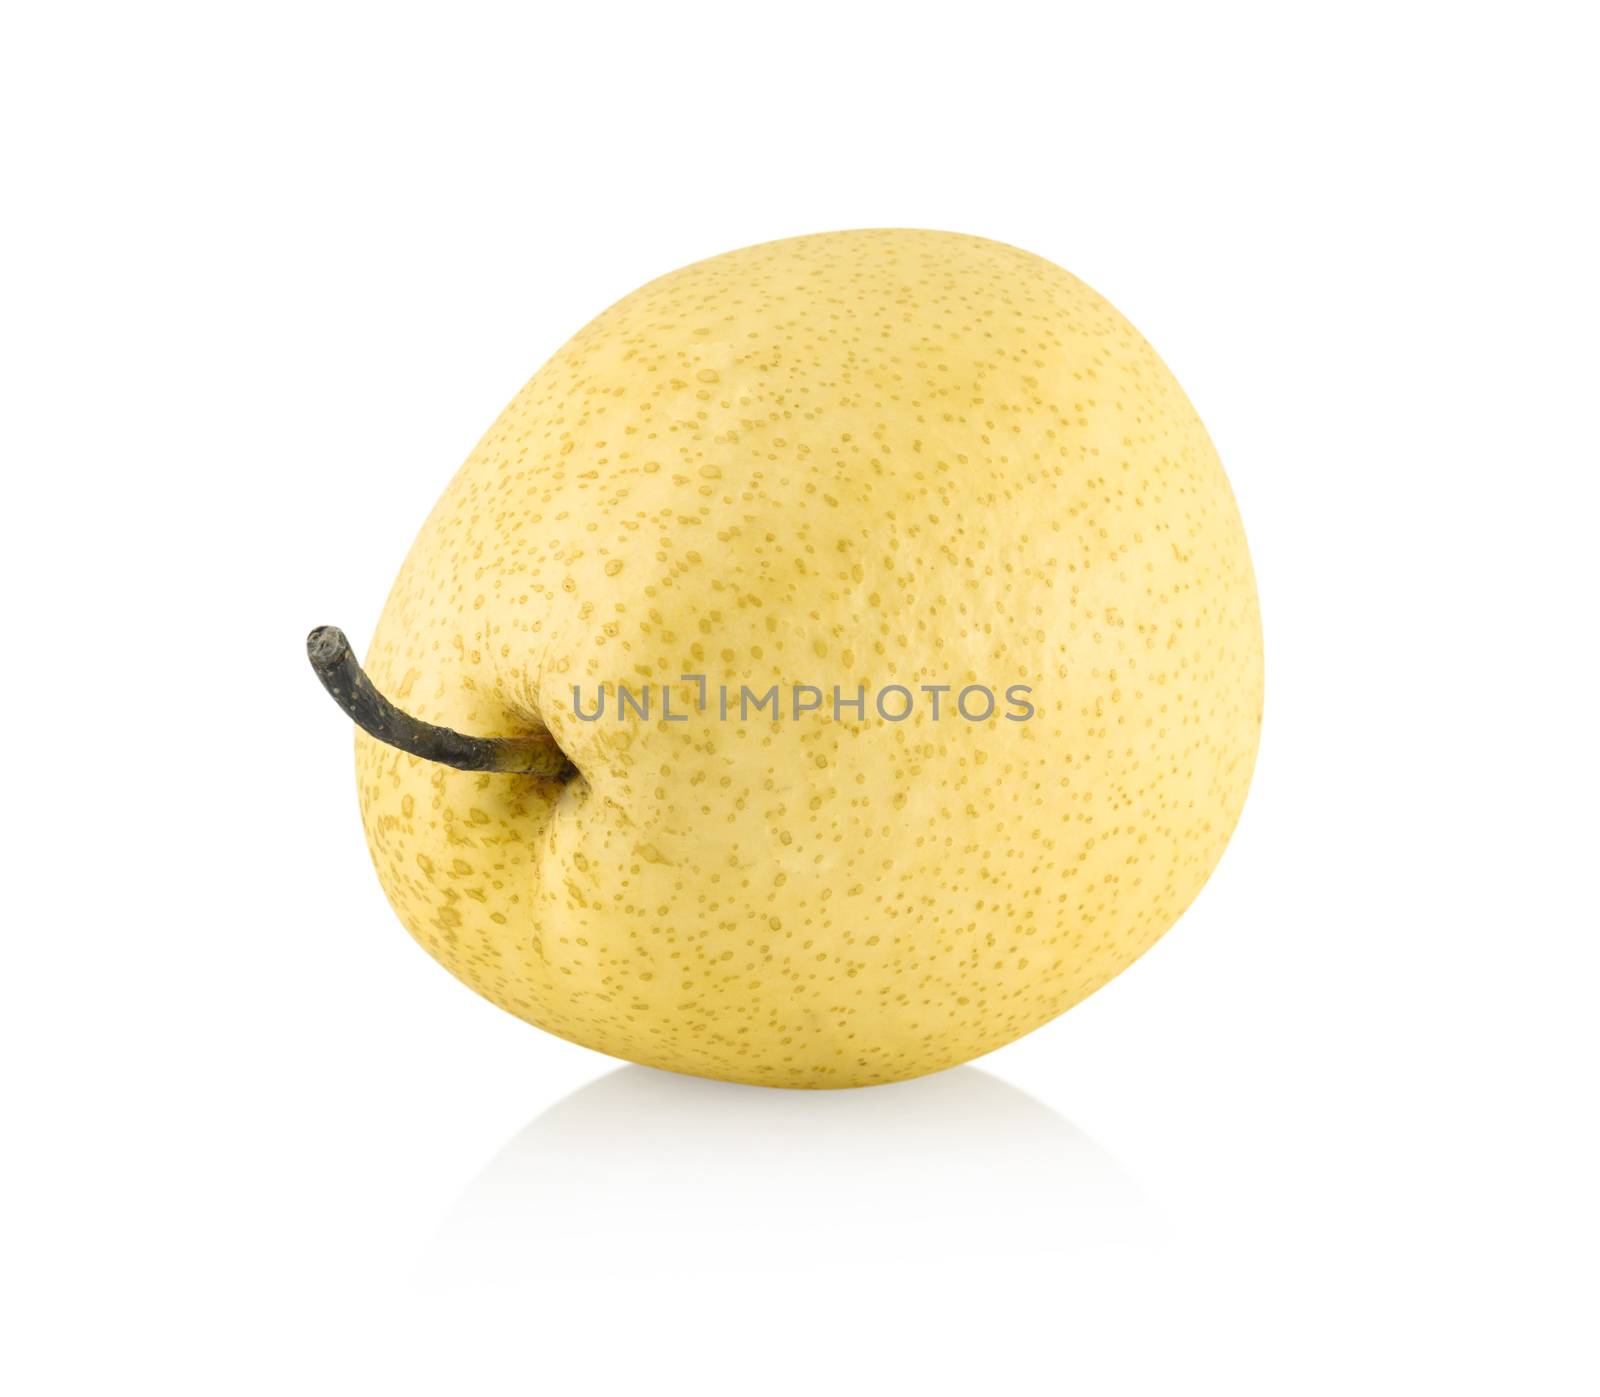 Chinese pear fruit with sliced isolated on white background by pt.pongsak@gmail.com